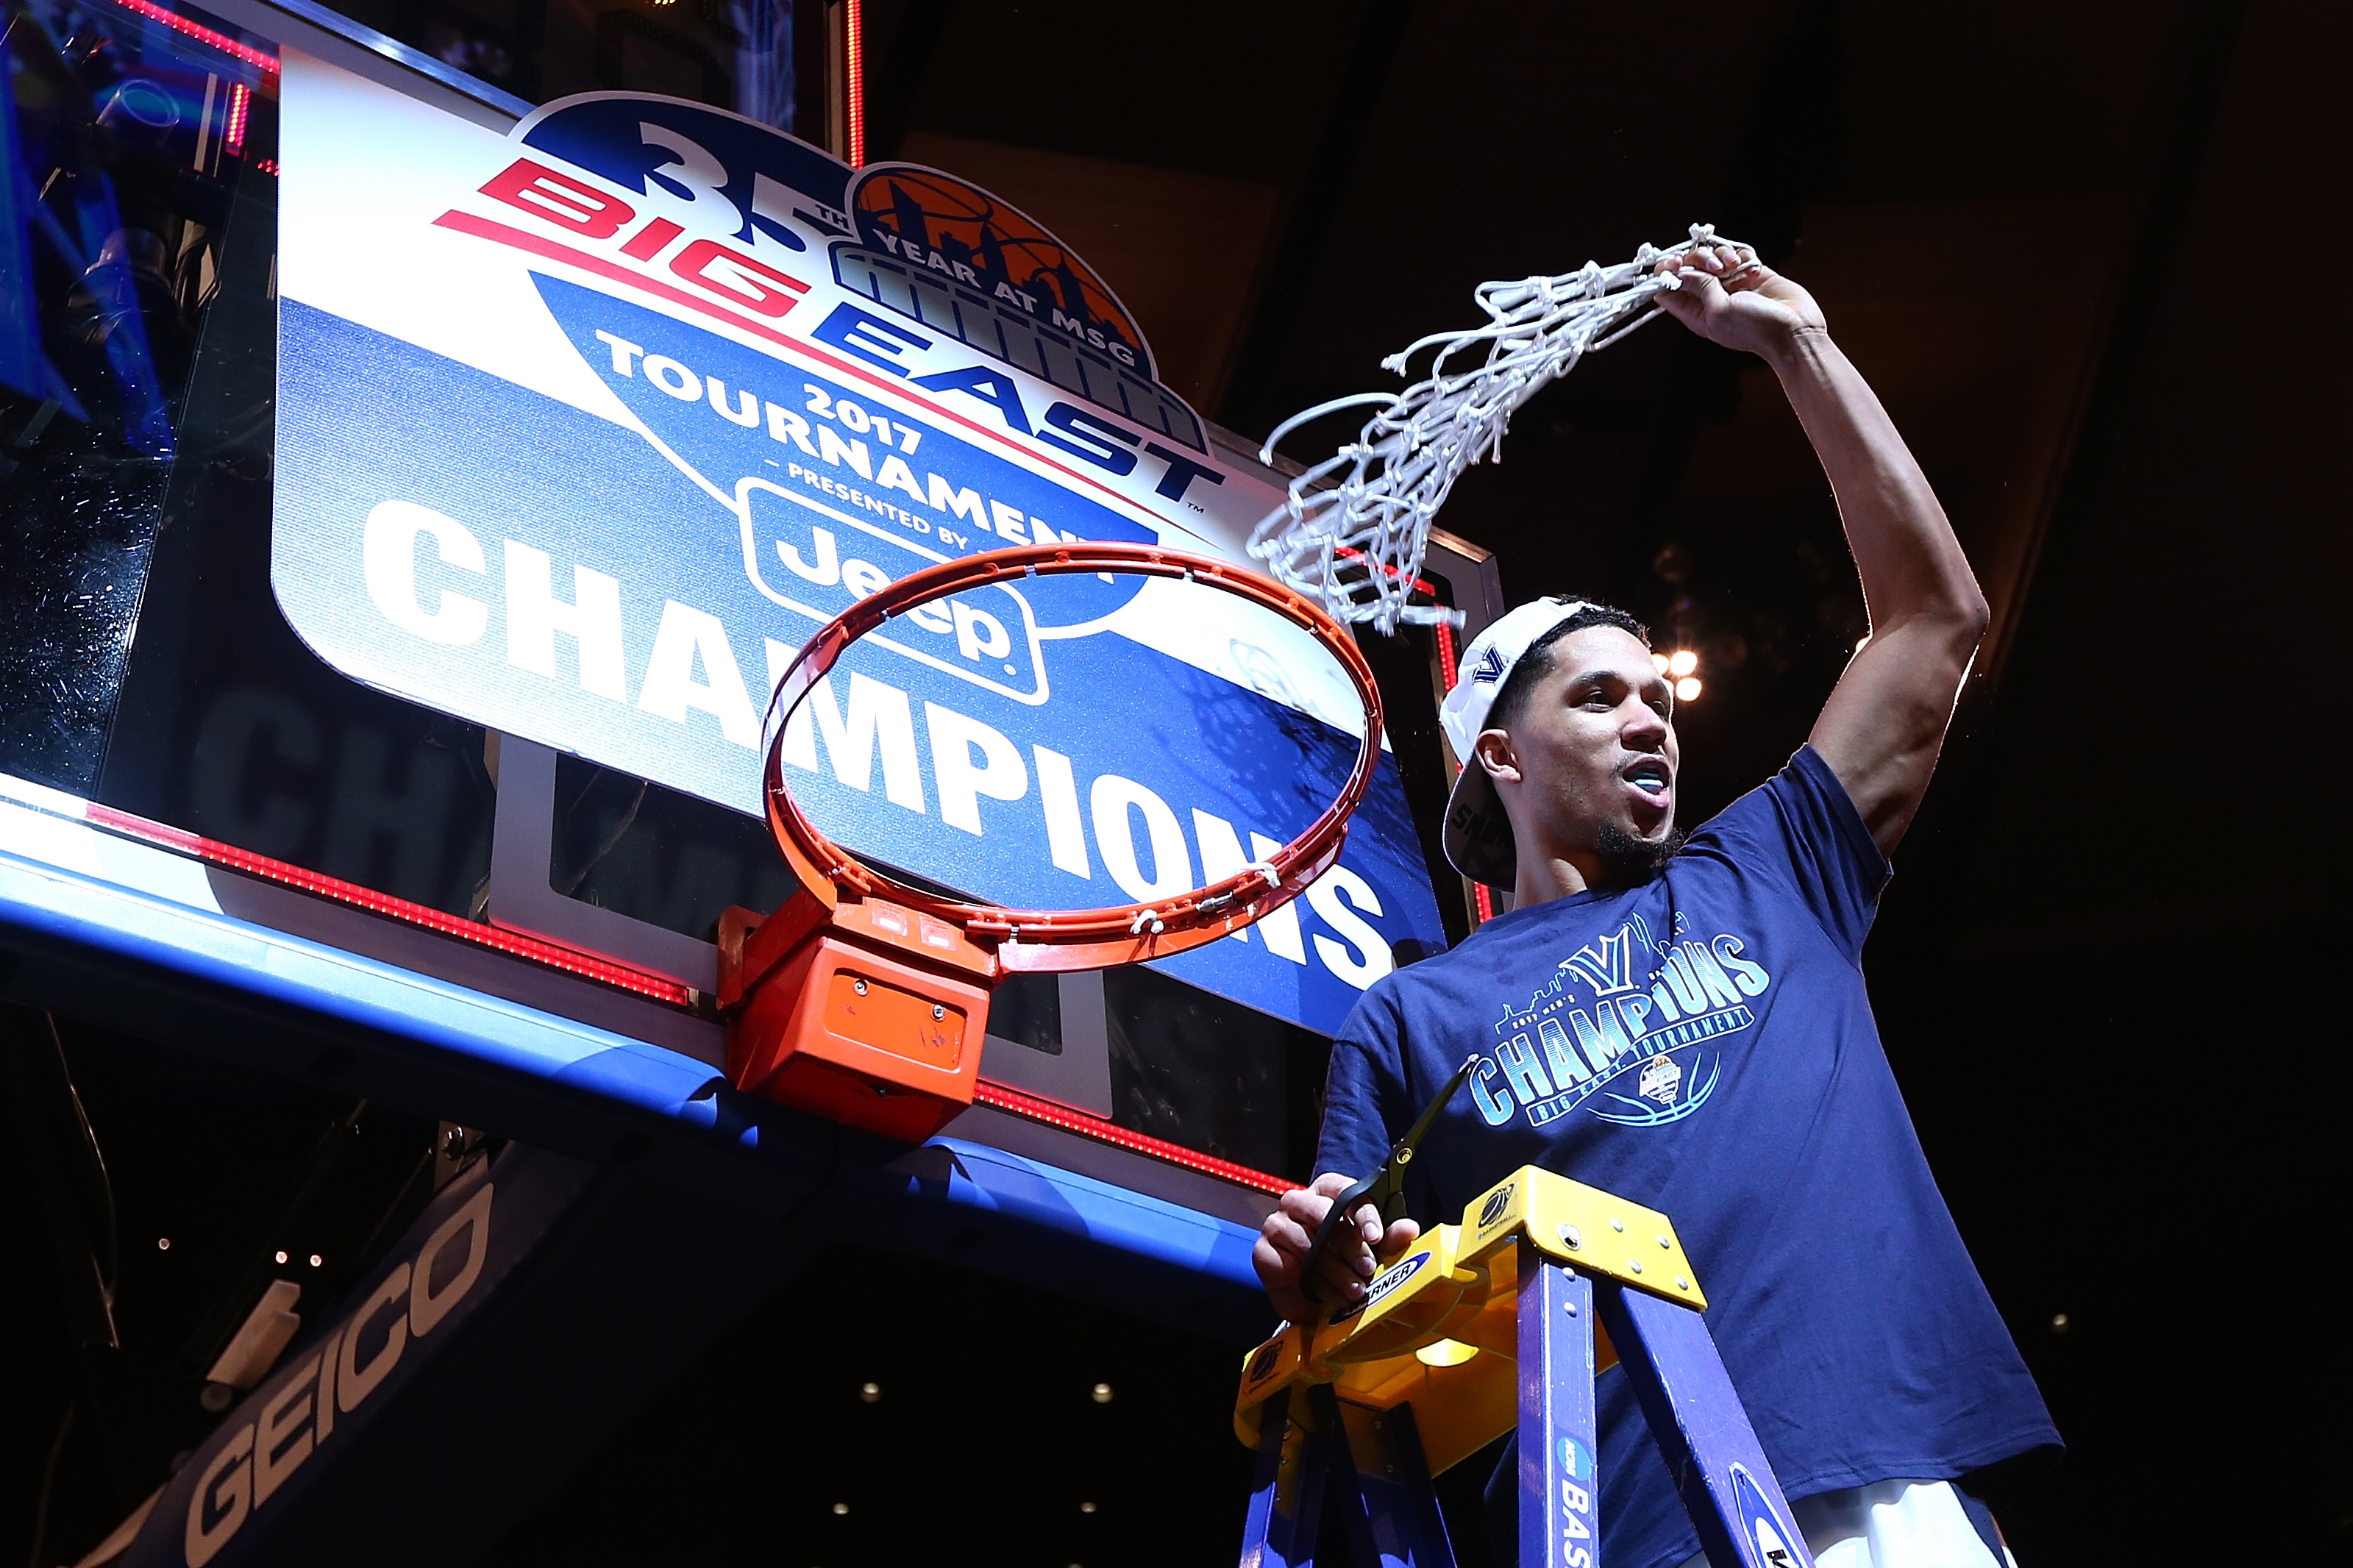 NEW YORK, NY - MARCH 11: Josh Hart #3 of the Villanova Wildcats cuts the net after defeating the Creighton Bluejays to win the Big East Basketball Tournament - Championship Game at Madison Square Garden on March 11, 2017 in New York City. (Photo by Mike Stobe/Getty Images)